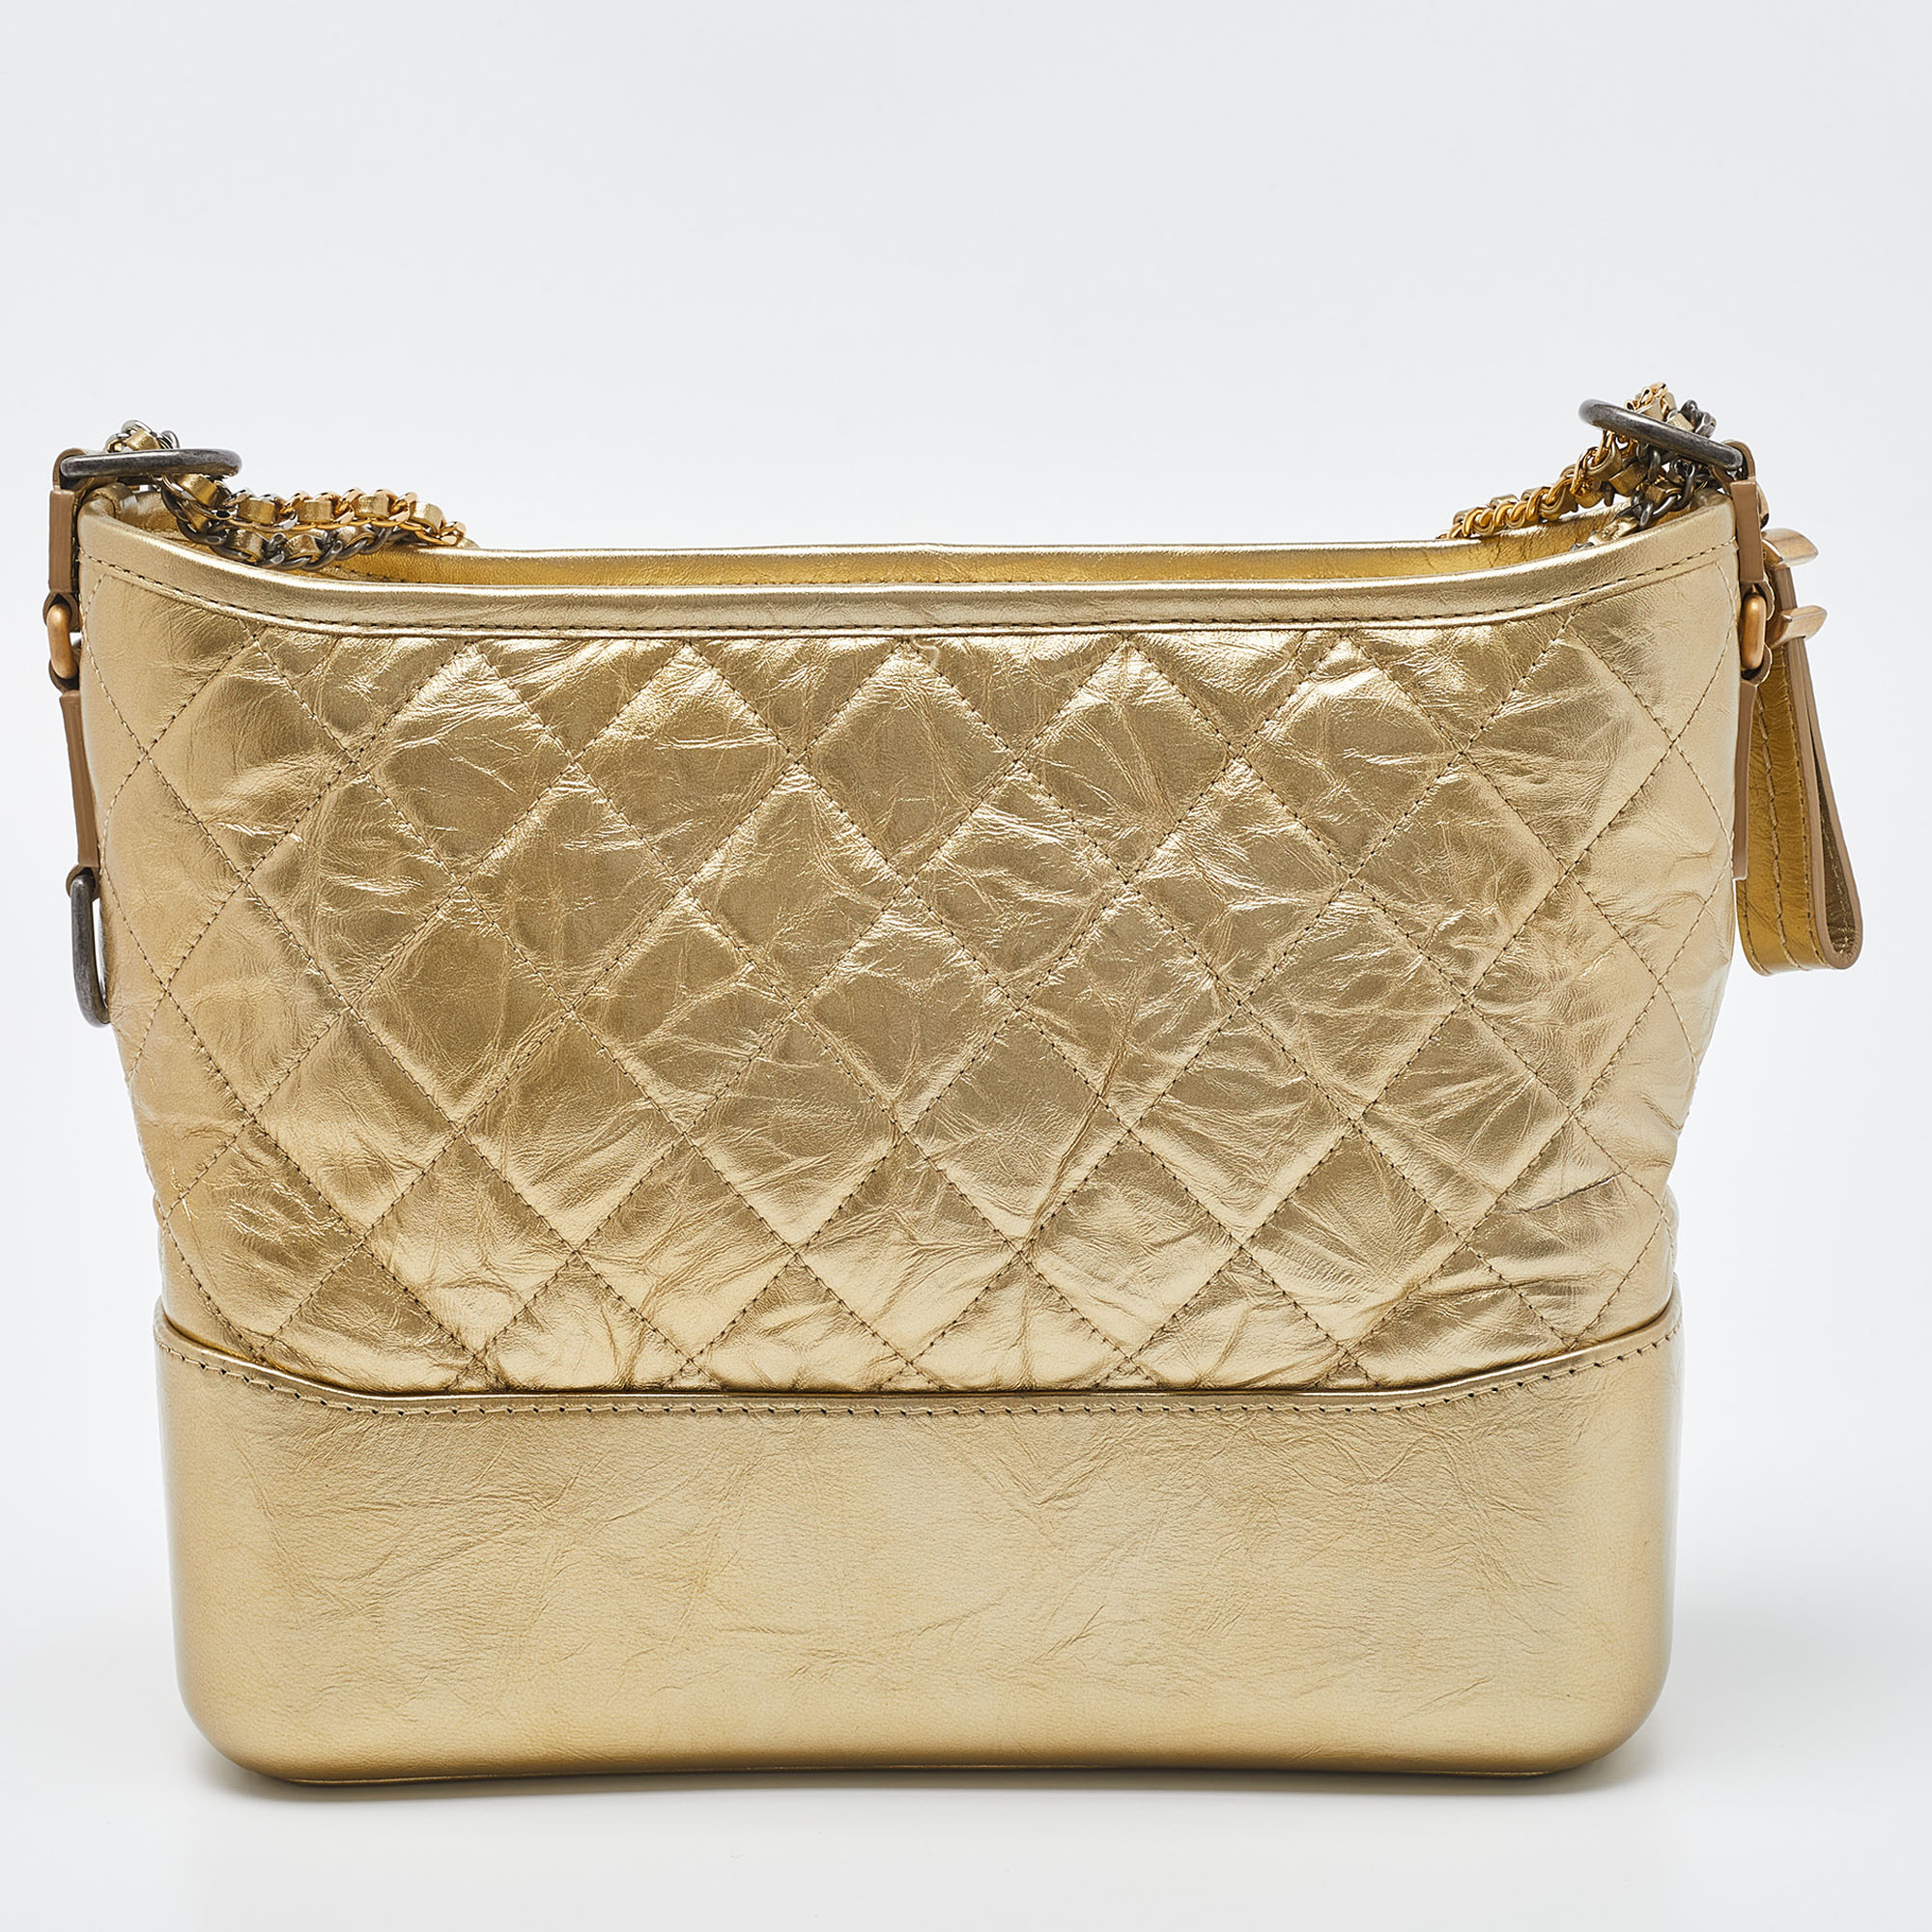 Chanel Gold Quilted Leather Medium Gabrielle Hobo